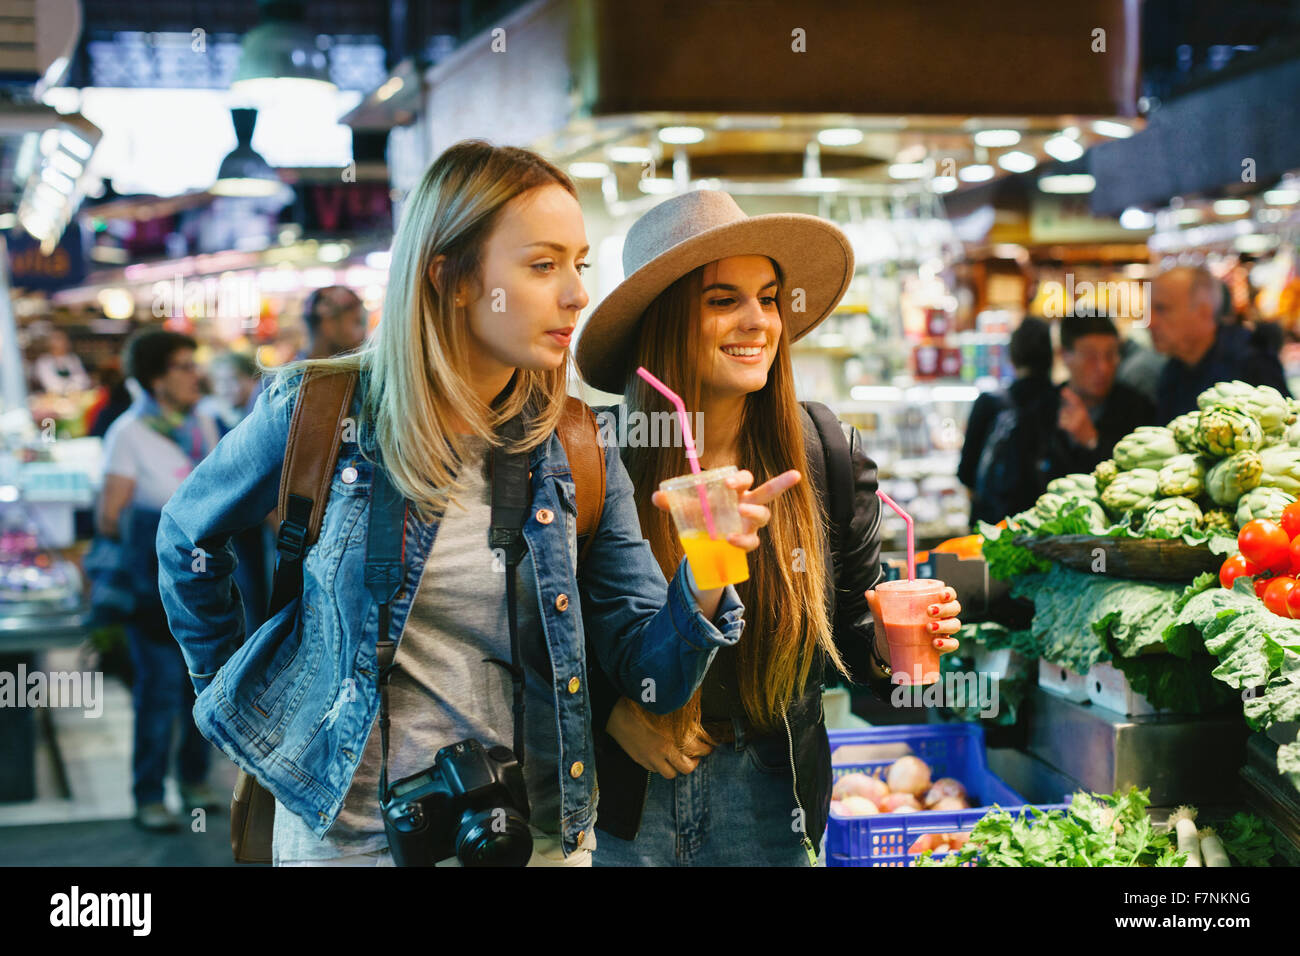 Two young women drinking smoothies on a market Stock Photo